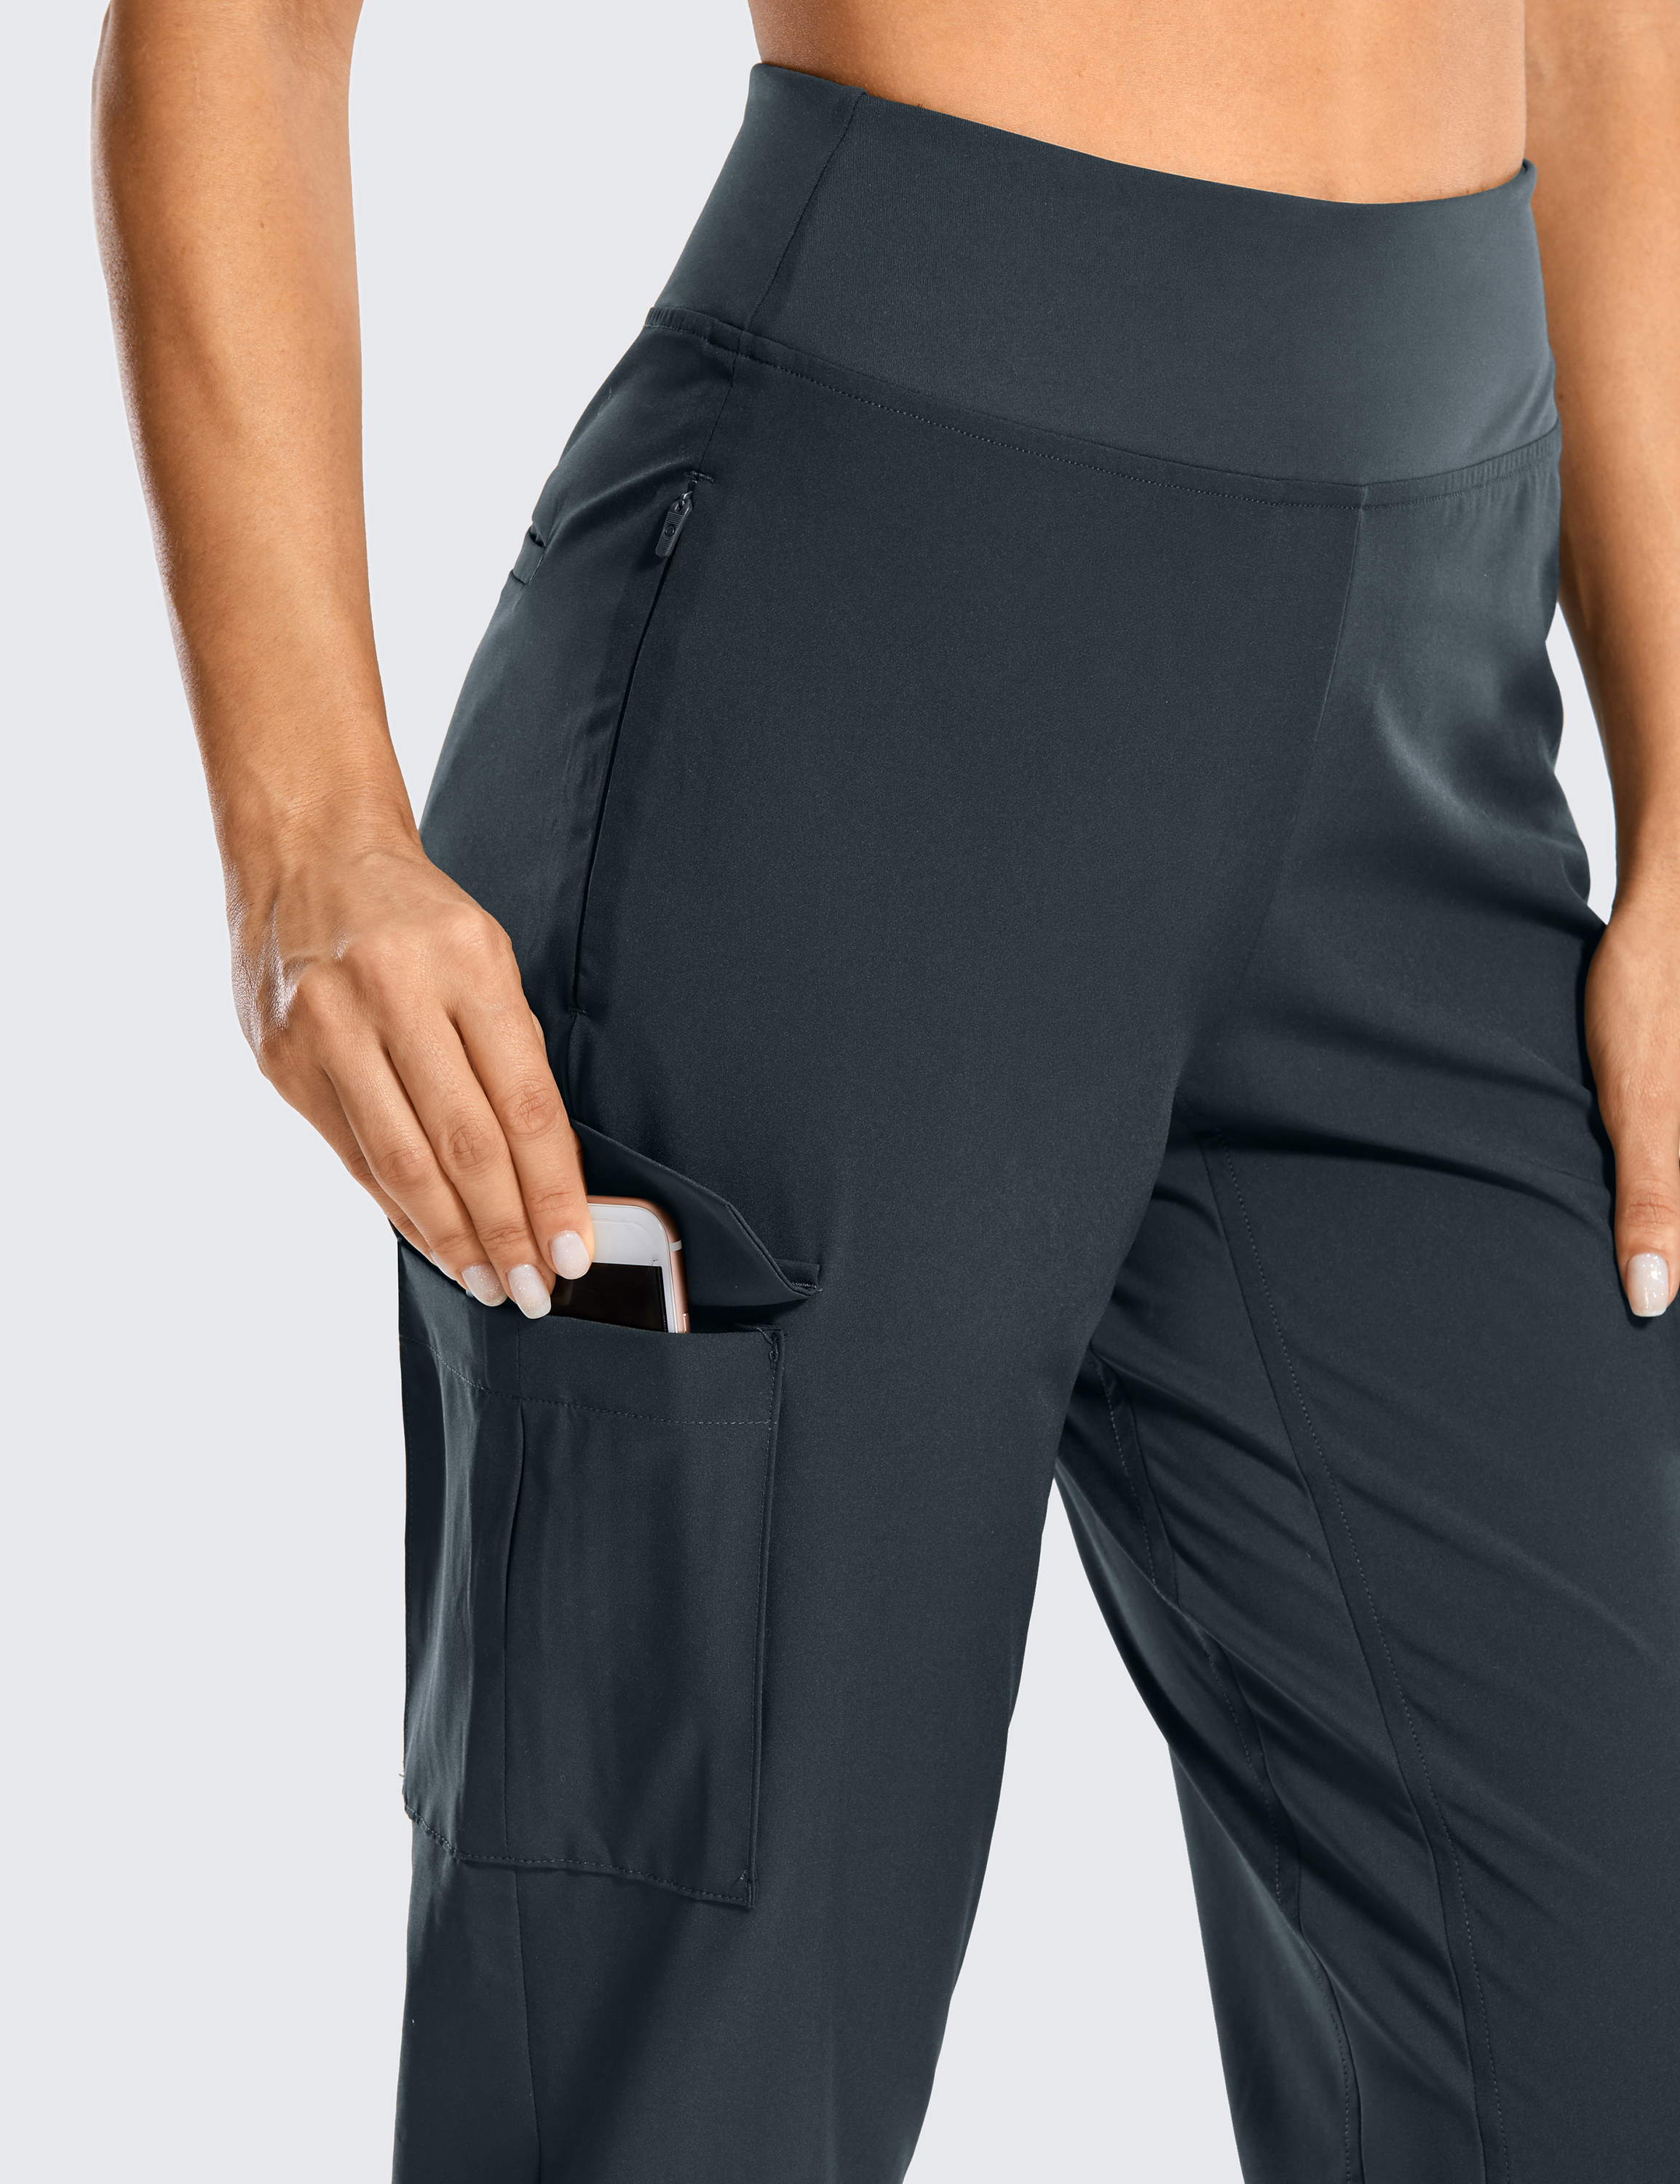 10 Minute Womens cargo workout pants for Gym